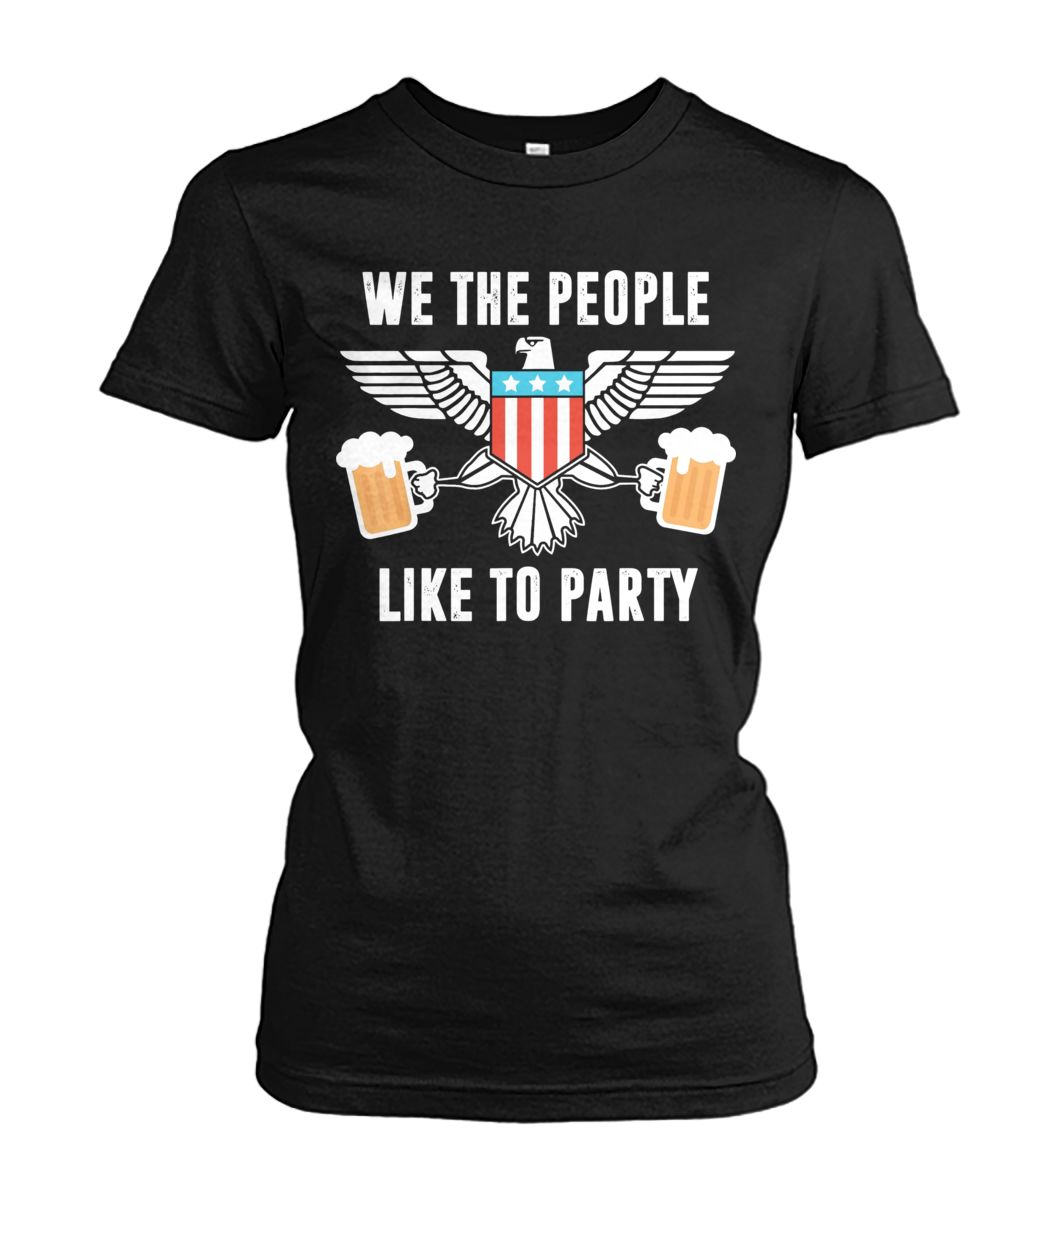 We the people like to party beer 4th of july women's crew tee